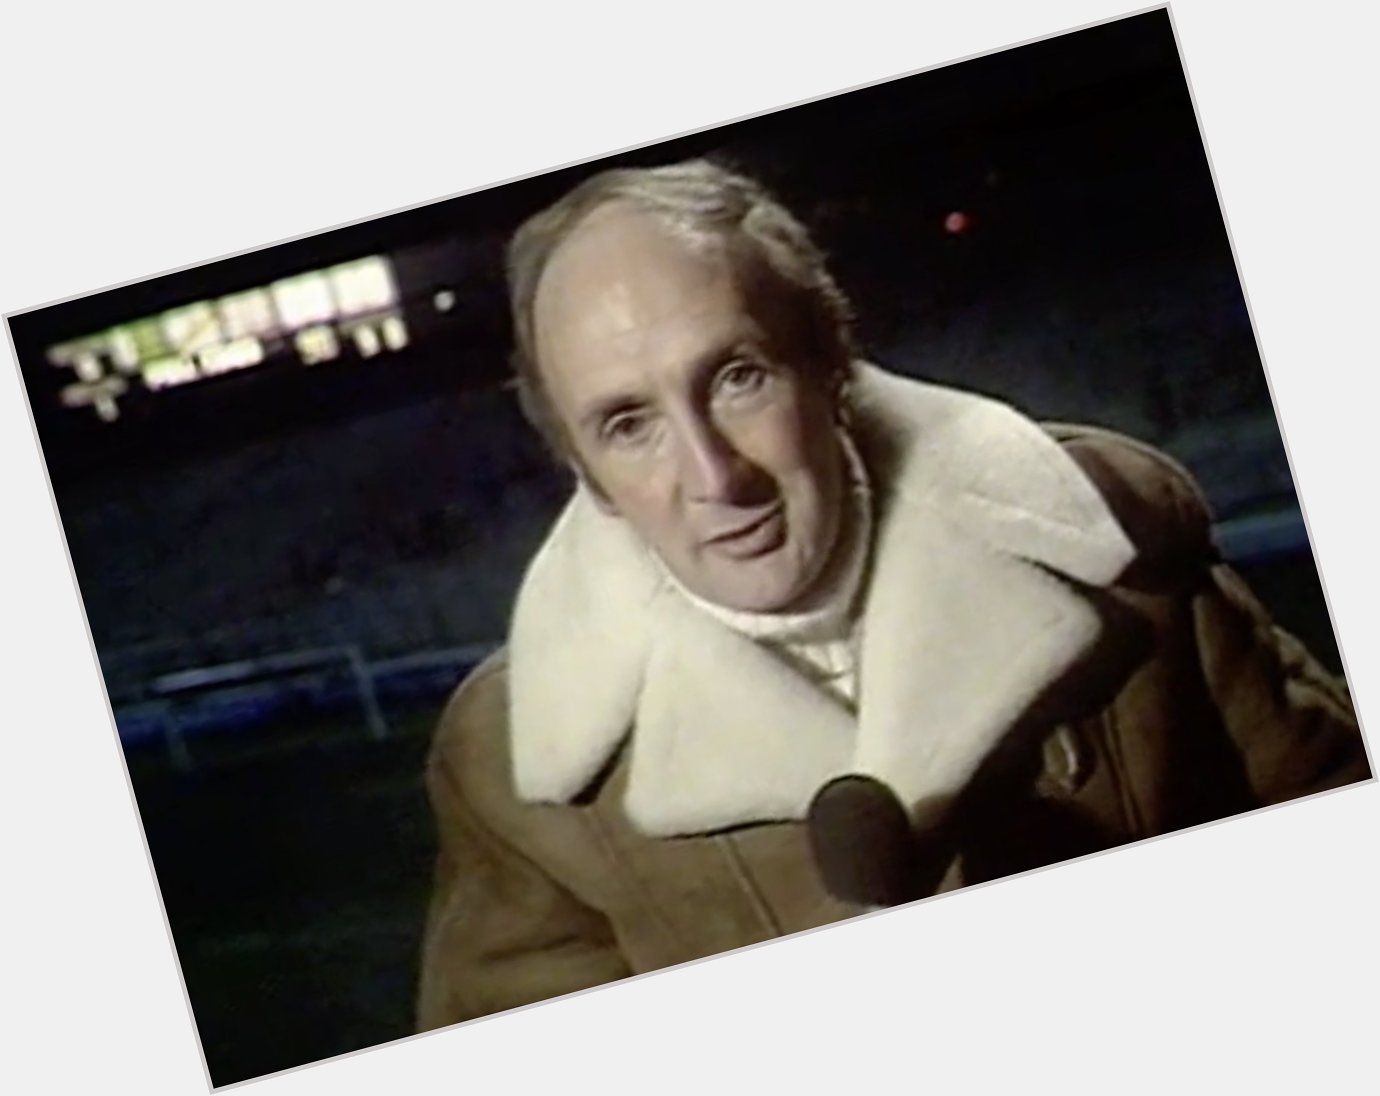 Happy birthday to Barry Davies 

Here at in Feb 79 